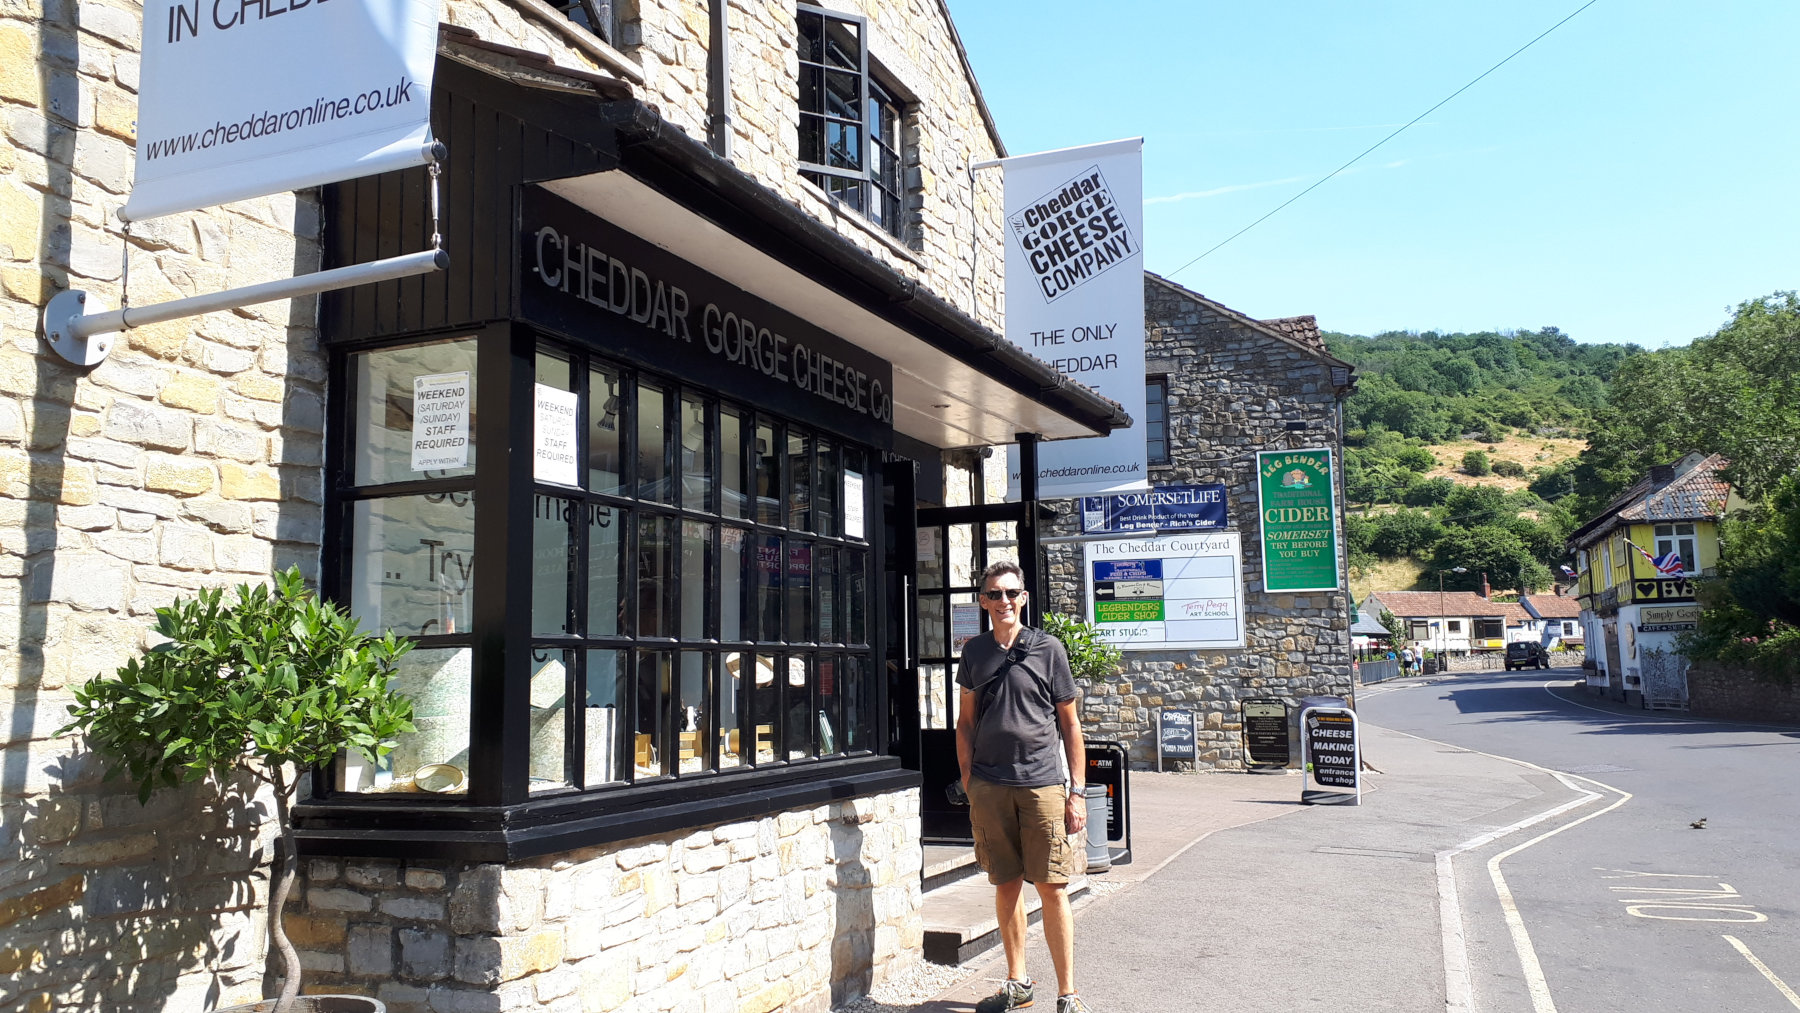 Julian aka self-confessed cheese addict, outside the cheddar cheese shop!